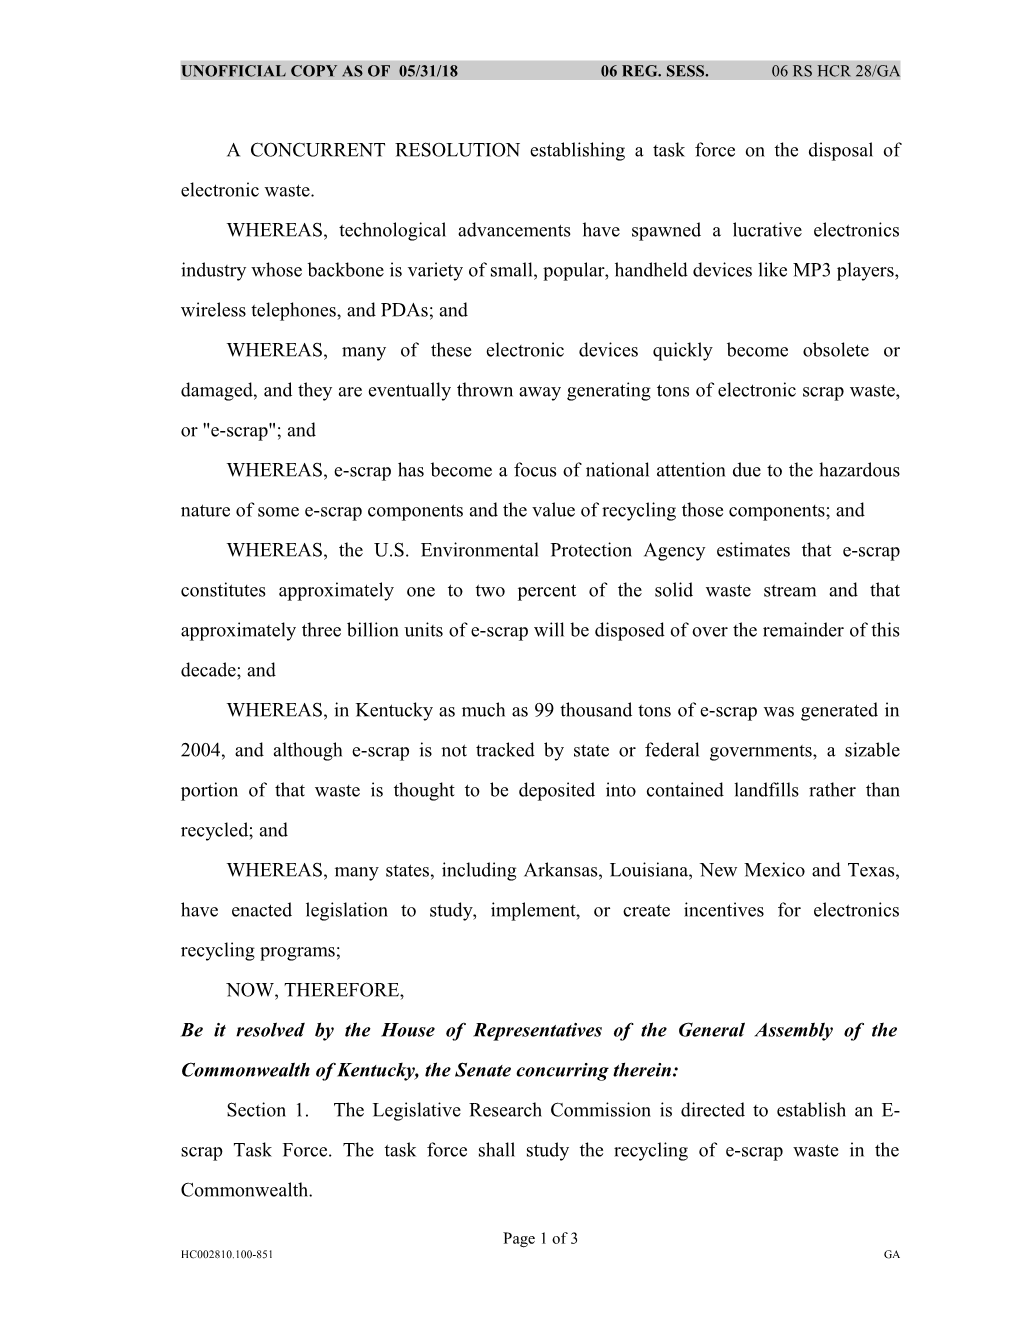 A CONCURRENT RESOLUTION Establishing a Task Force on the Disposal of Electronic Waste